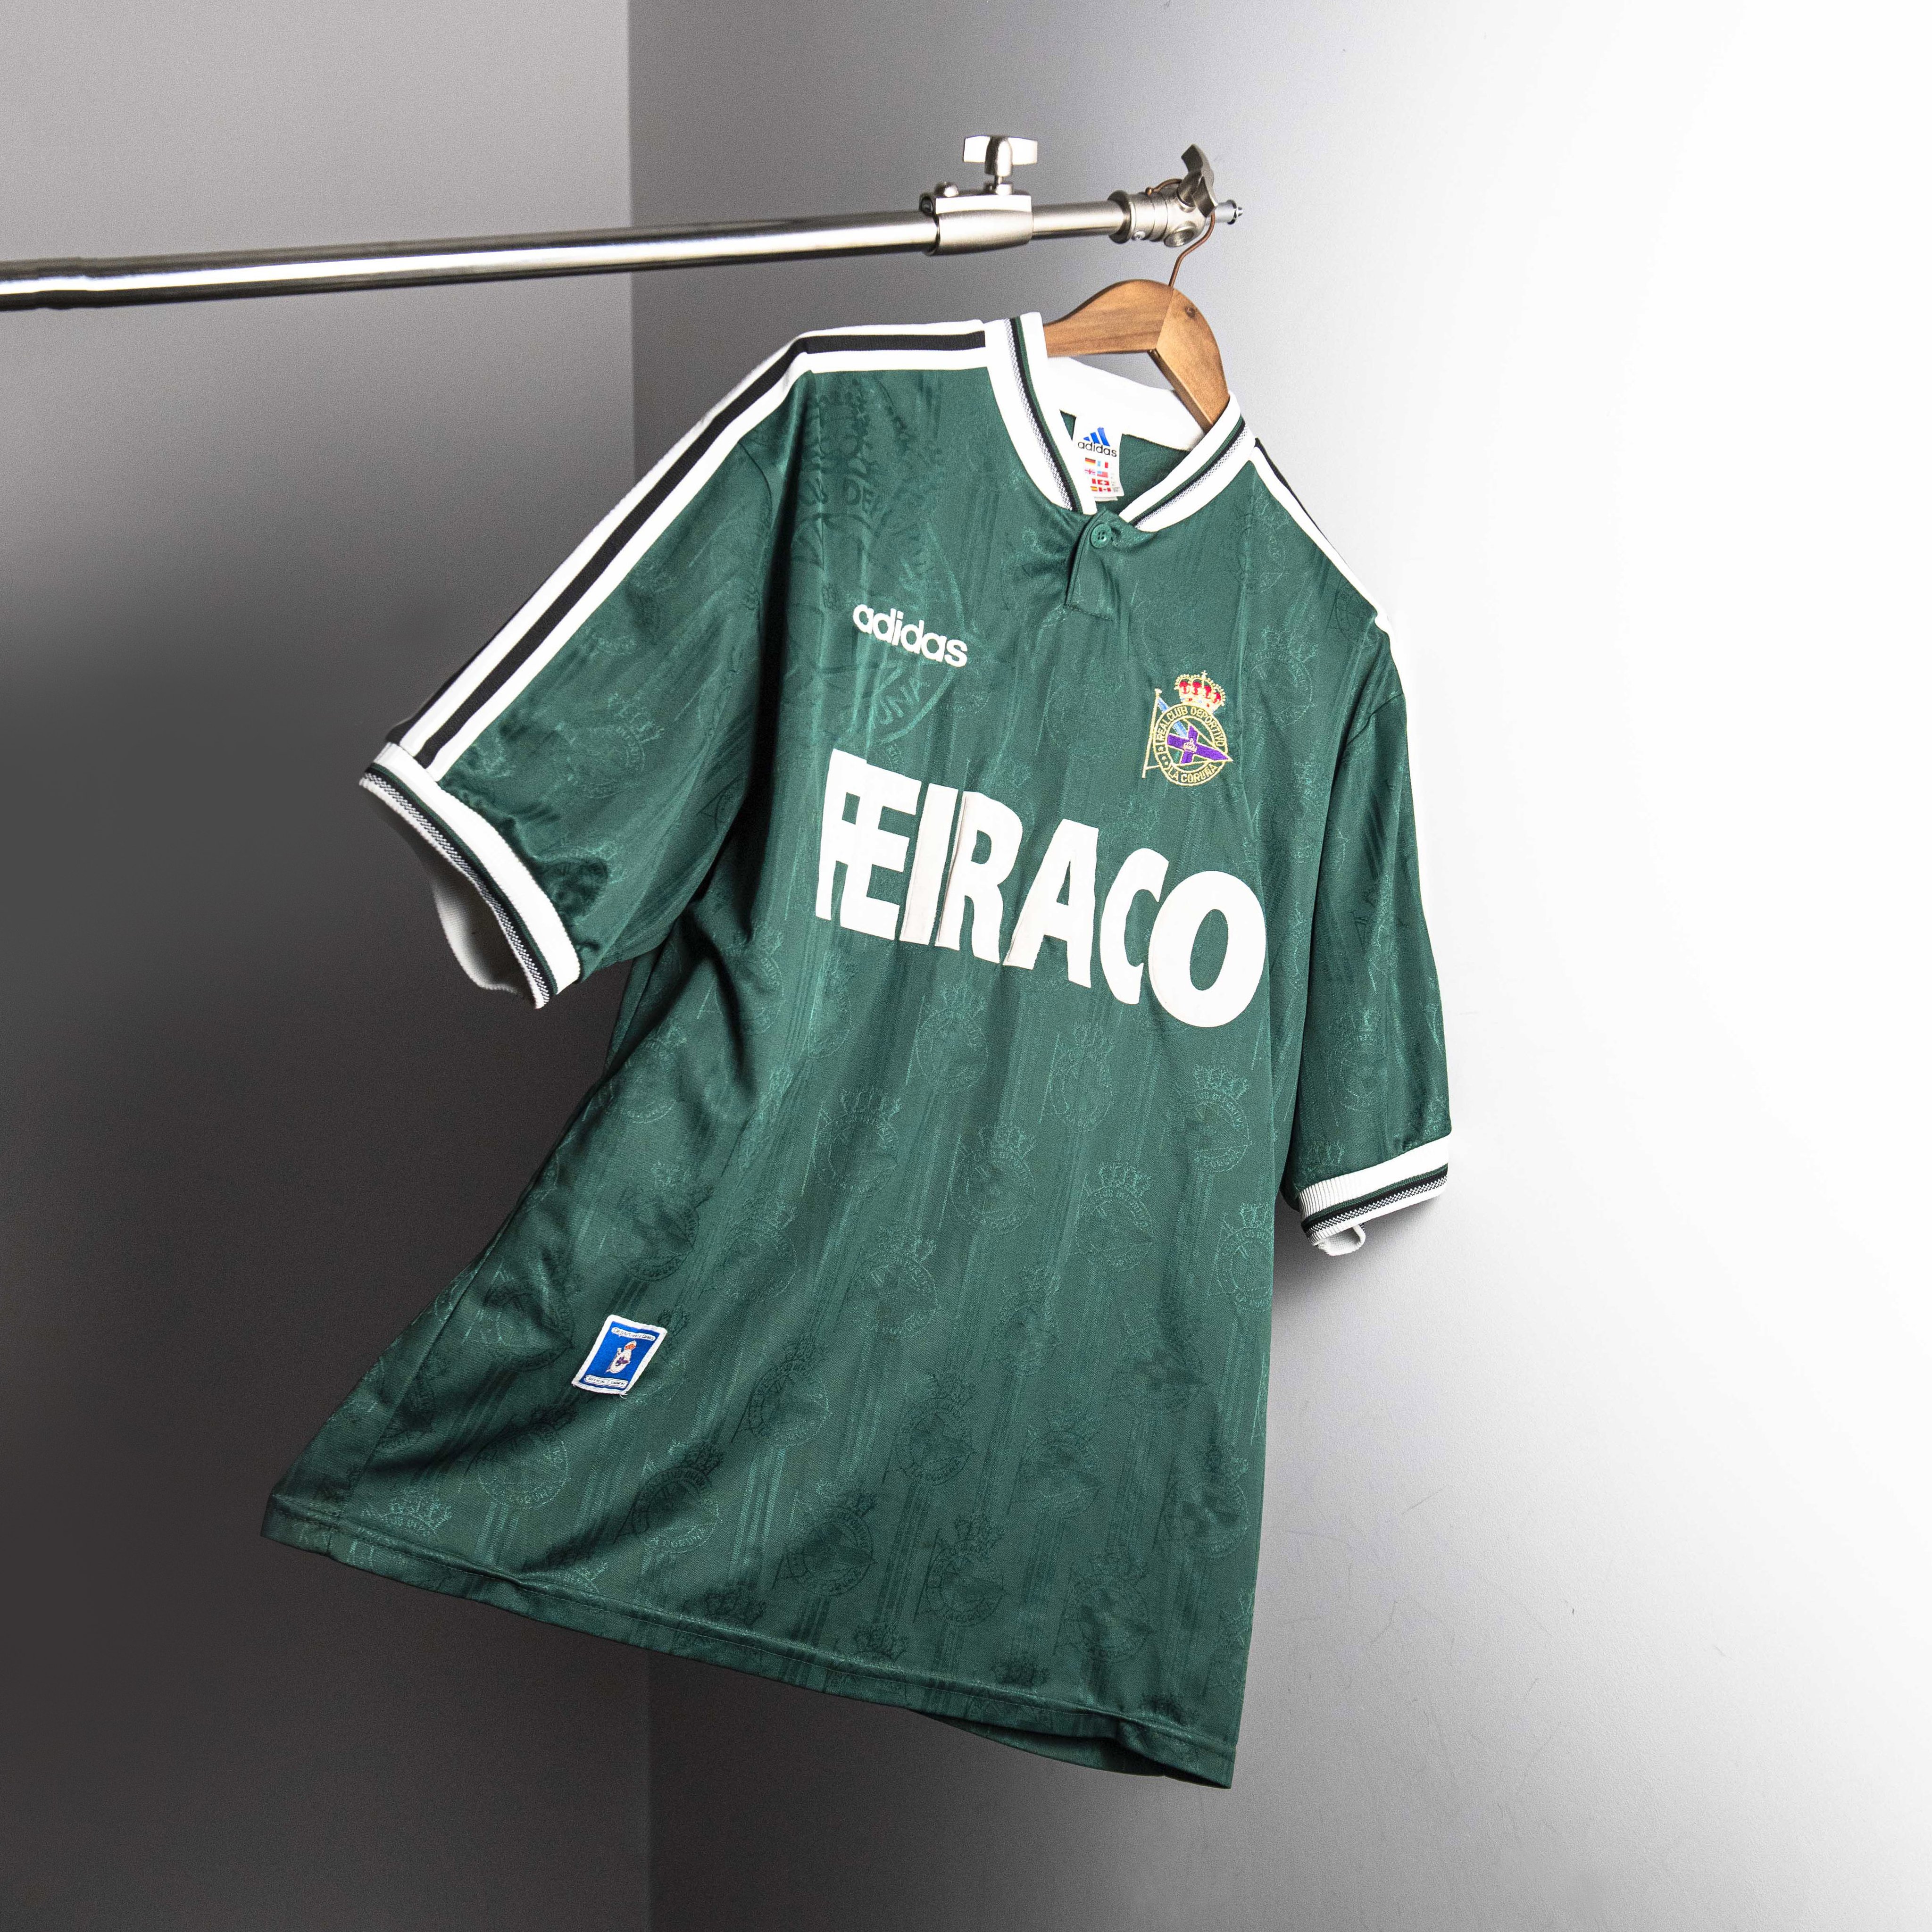 Football Shirts on Twitter: "Deportivo La Coruña 1996 Away by adidas 🇪🇸 the site on Friday 14:00 Time) in a size XL. https://t.co/9WCZtPgTYb" / Twitter